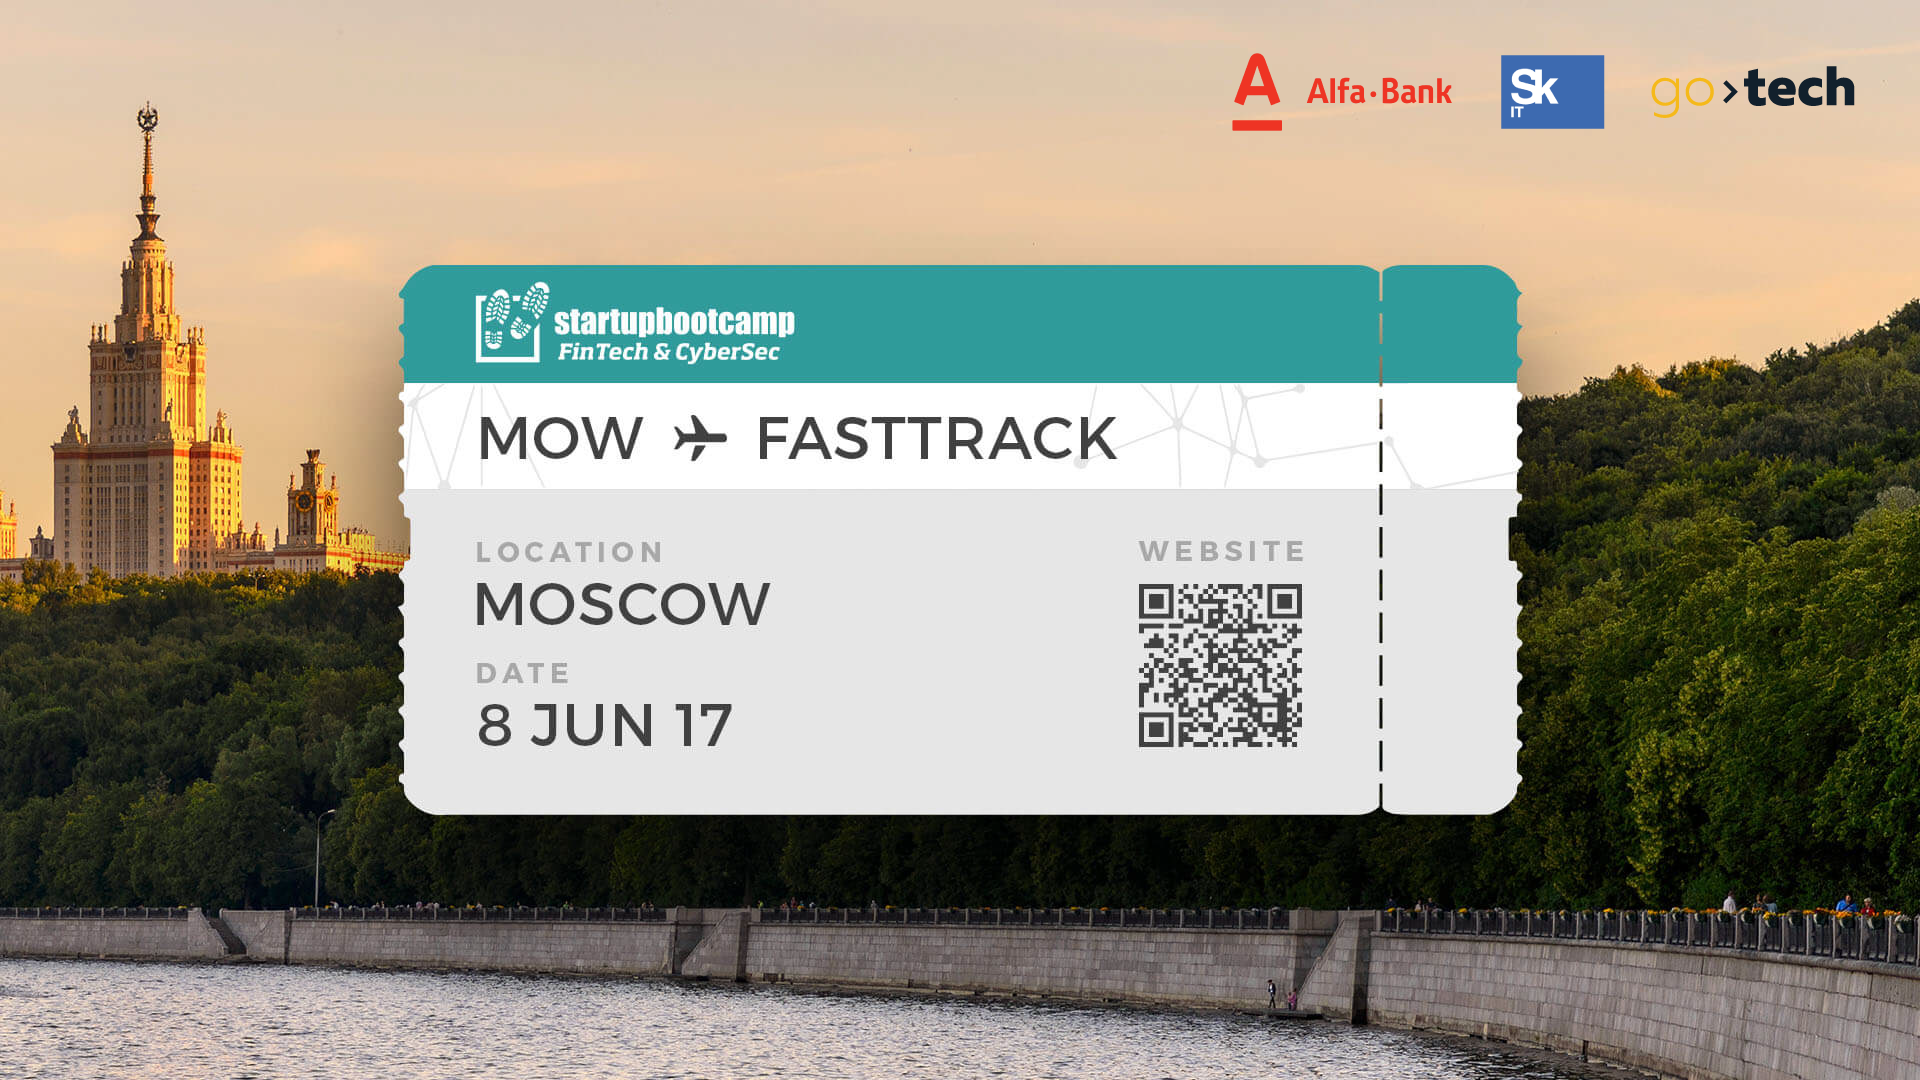 GoTech invites to join Startupbootcamp FastTrack in Moscow on June 8th